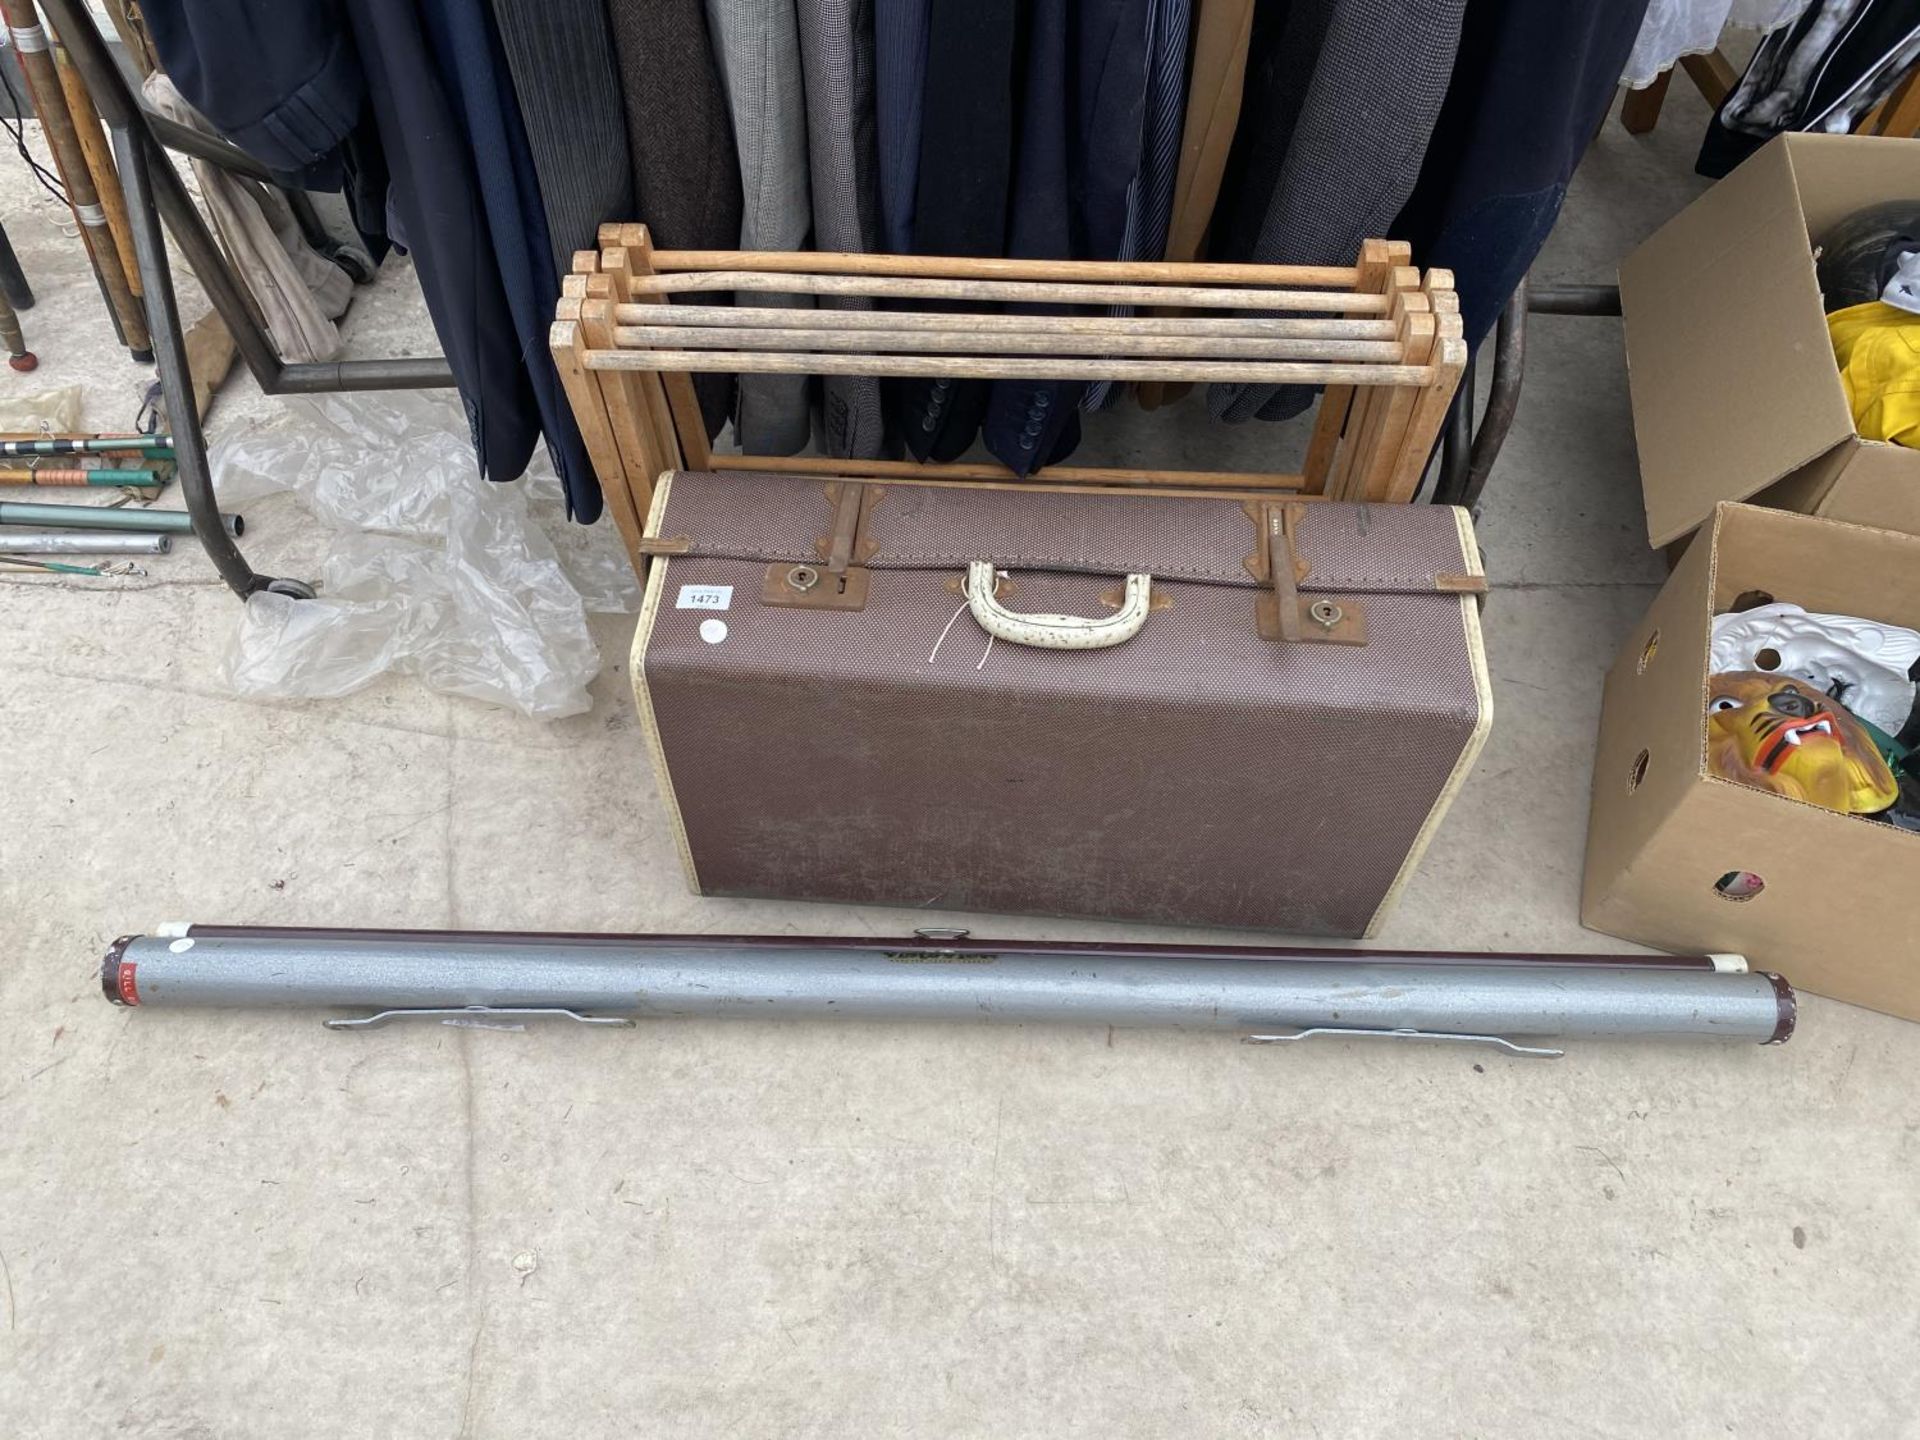 A VINTAGE SUITCASE, PROJECTOR SCREEN AND CLOTHES MAIDEN